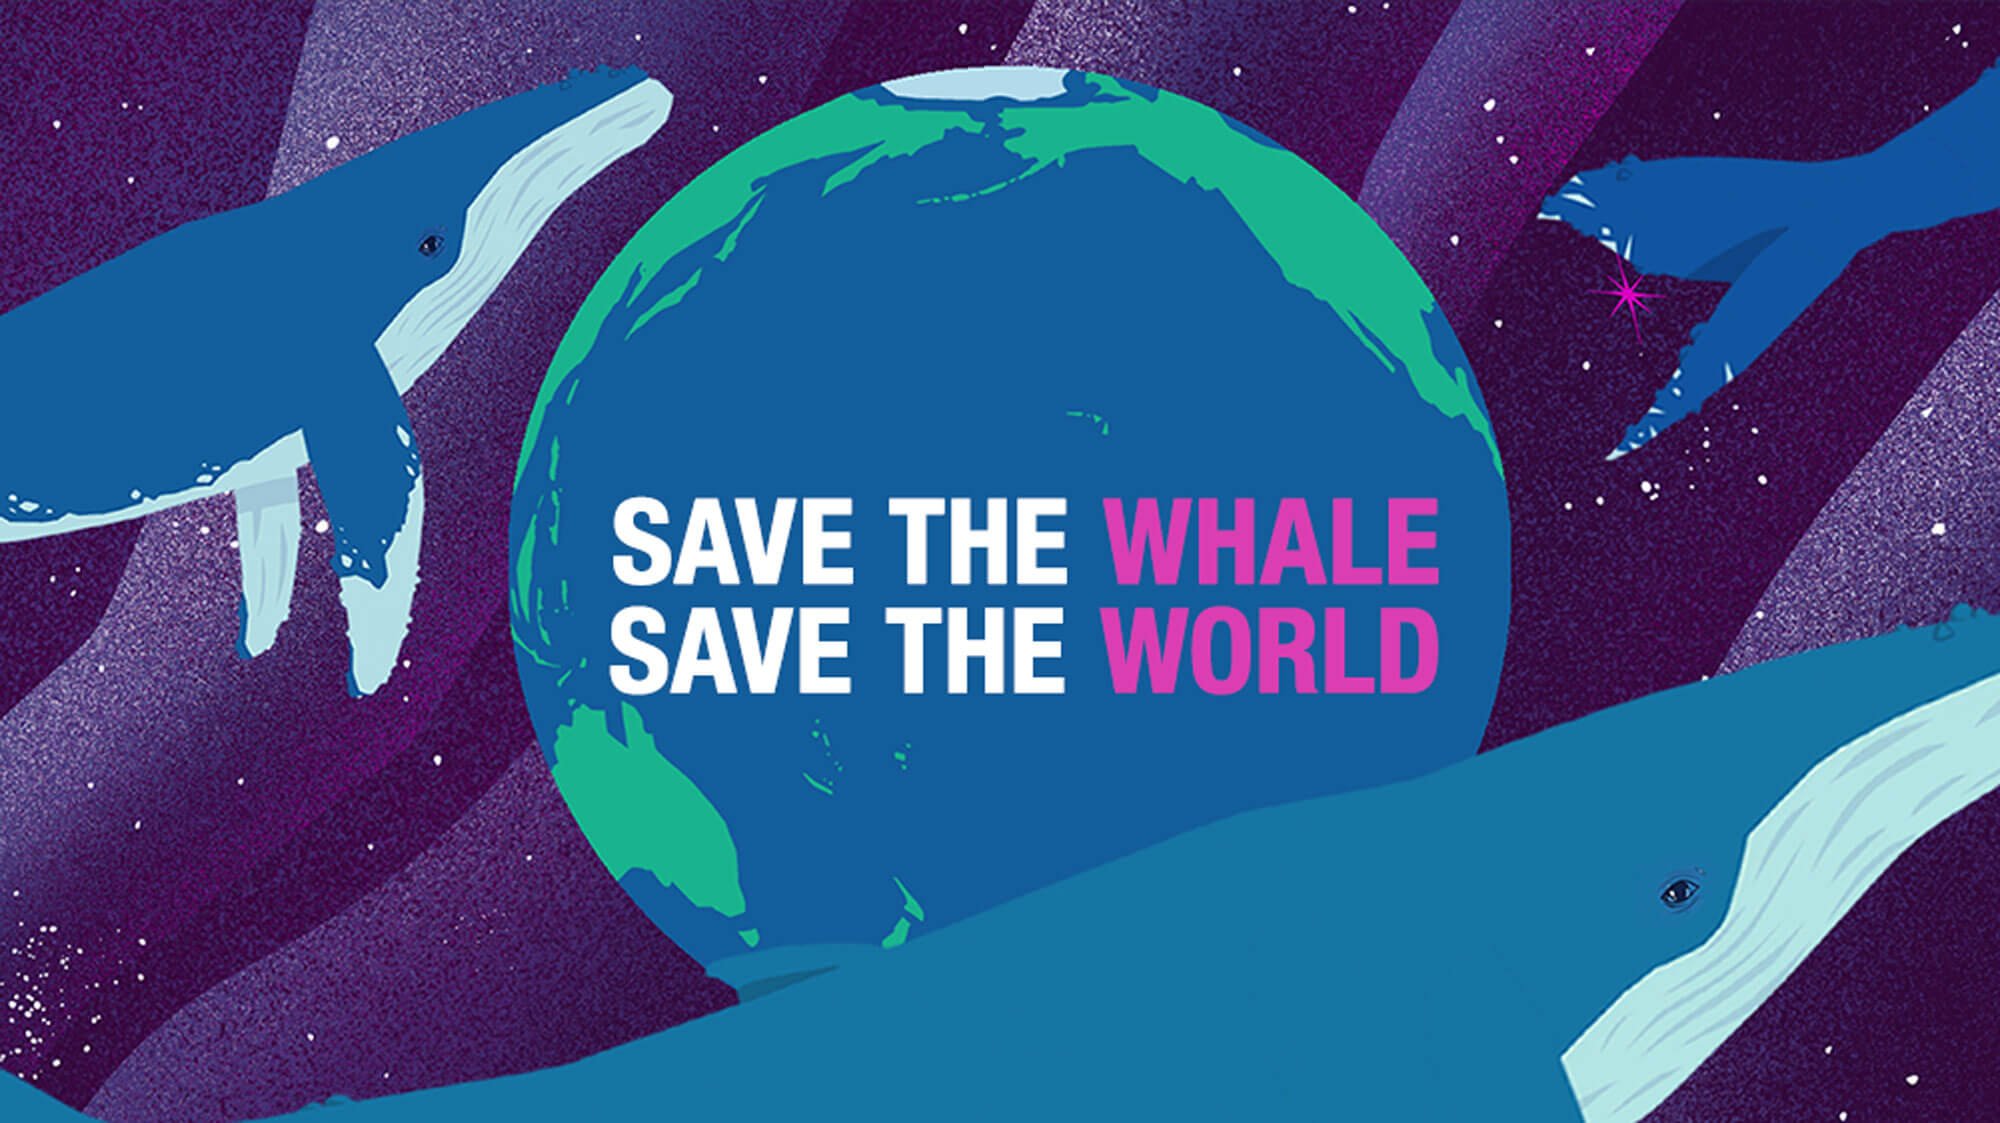 Save the whale, save the world banner